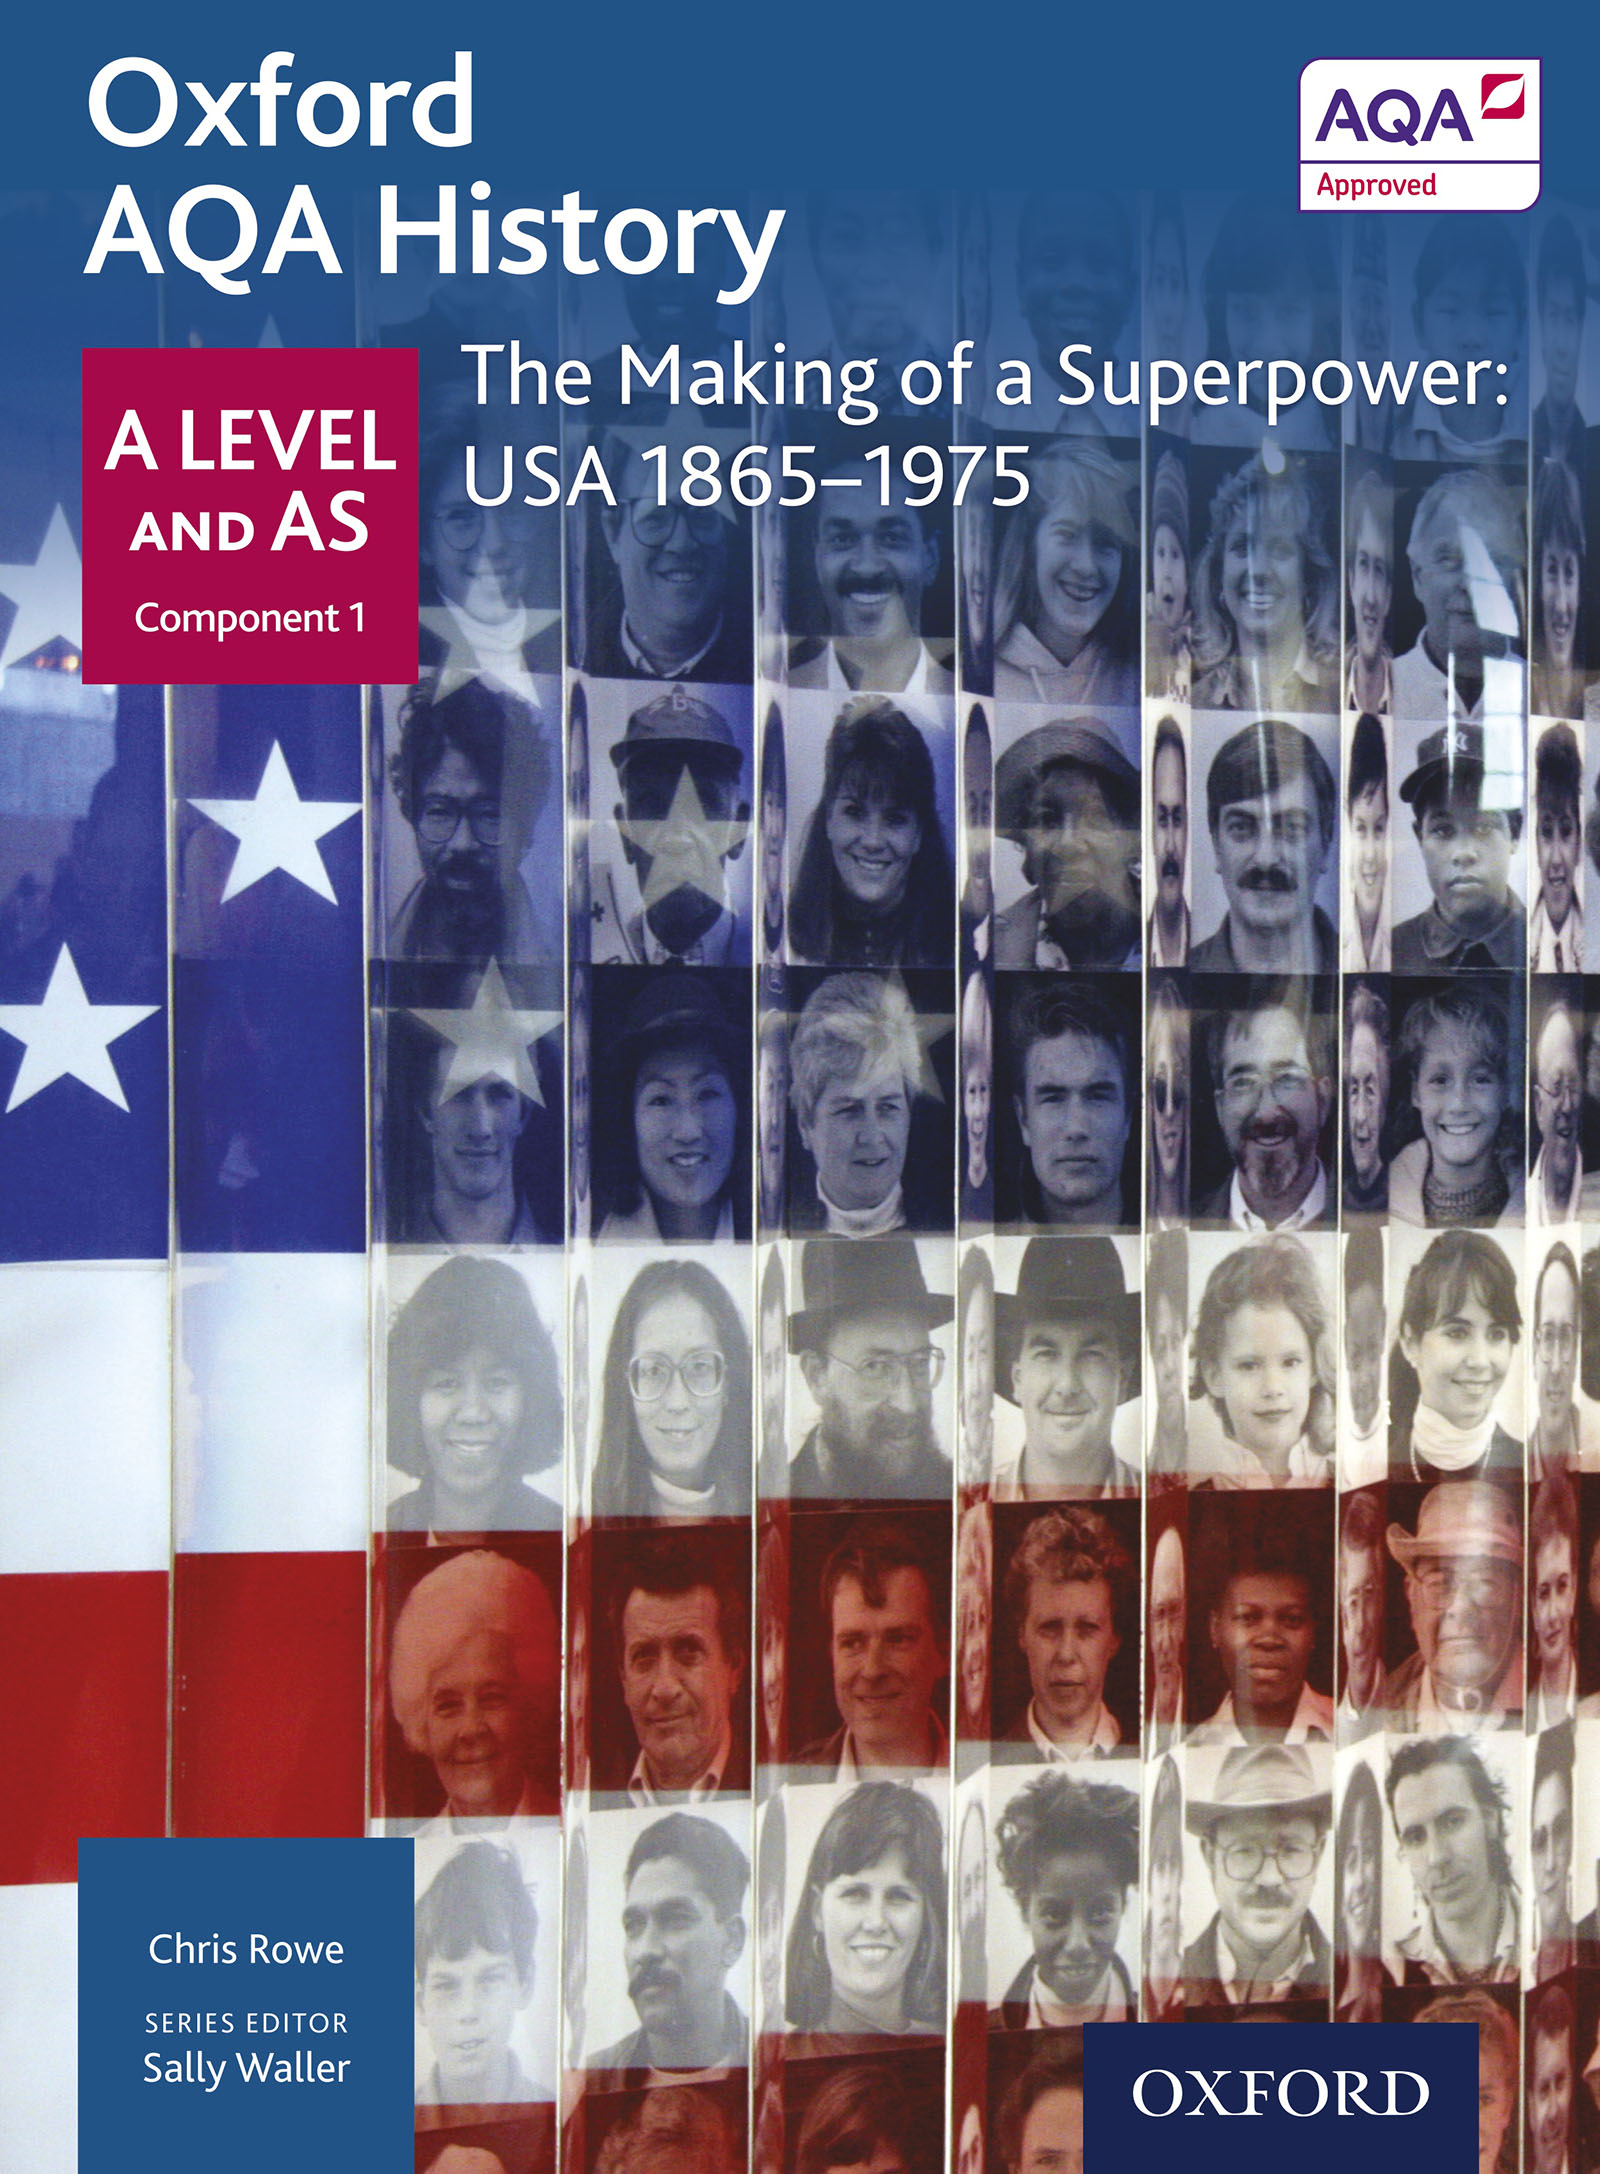 Oxford AQA History: A Level and AS Component 1: The Making of a Superpower: USA 1865-1975